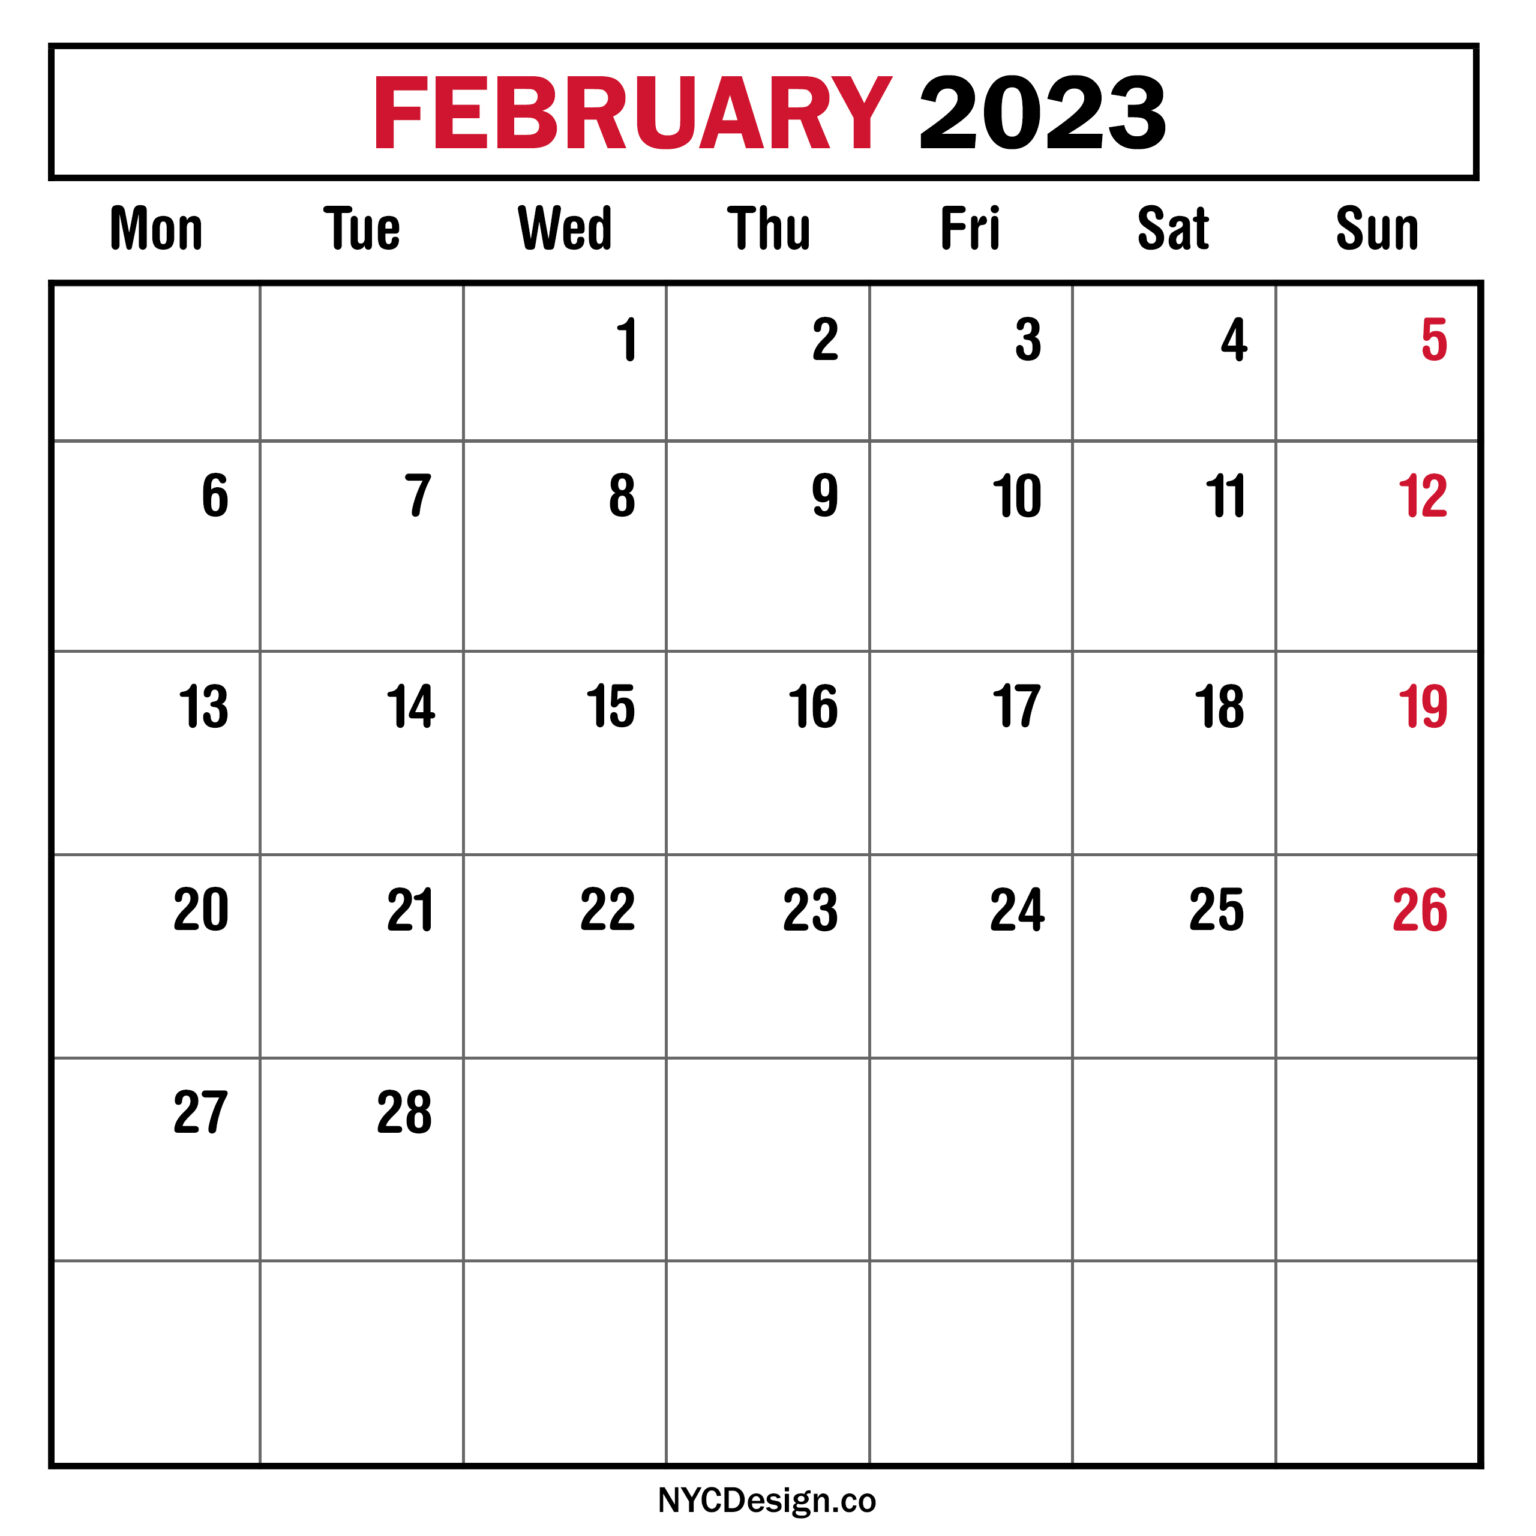 February 2023 Monthly Calendar with UK Holidays, Planner, Printable ...